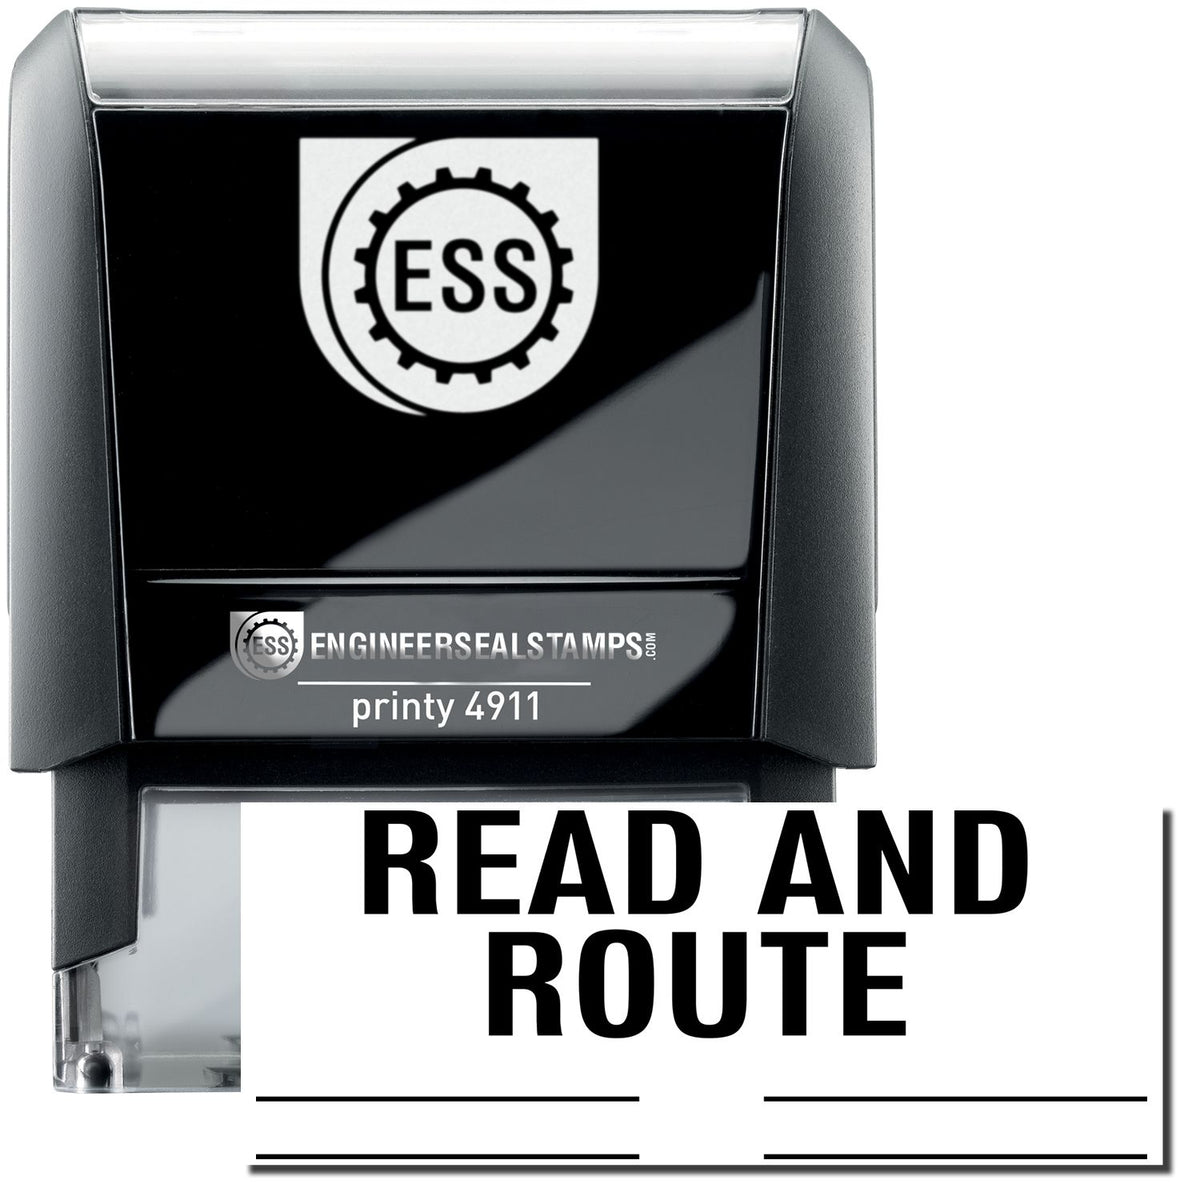 A self-inking stamp with a stamped image showing how the text &quot;READ AND ROUTE&quot; with lines below the text is displayed after stamping.